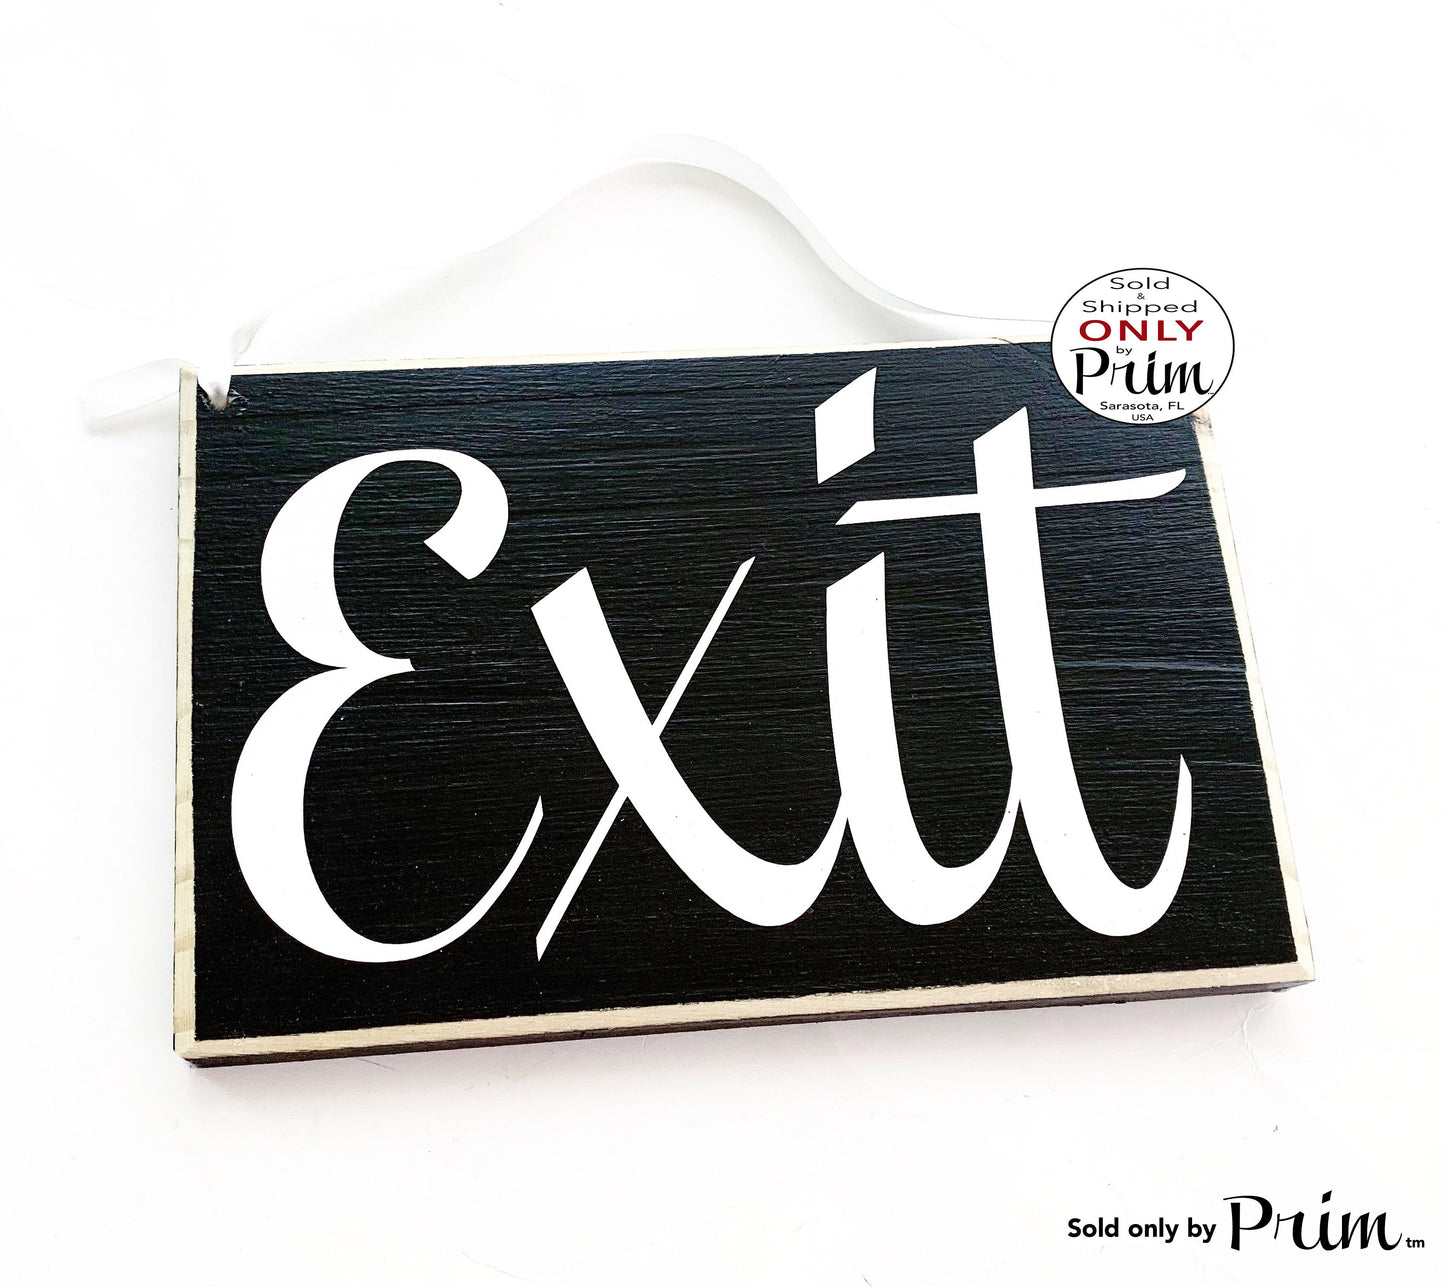 8x6 Exit Custom Wood Sign Business Office Spa Salon Store Boutique Shop Do Not Enter Emergency Fire Entrance Welcome Plaque